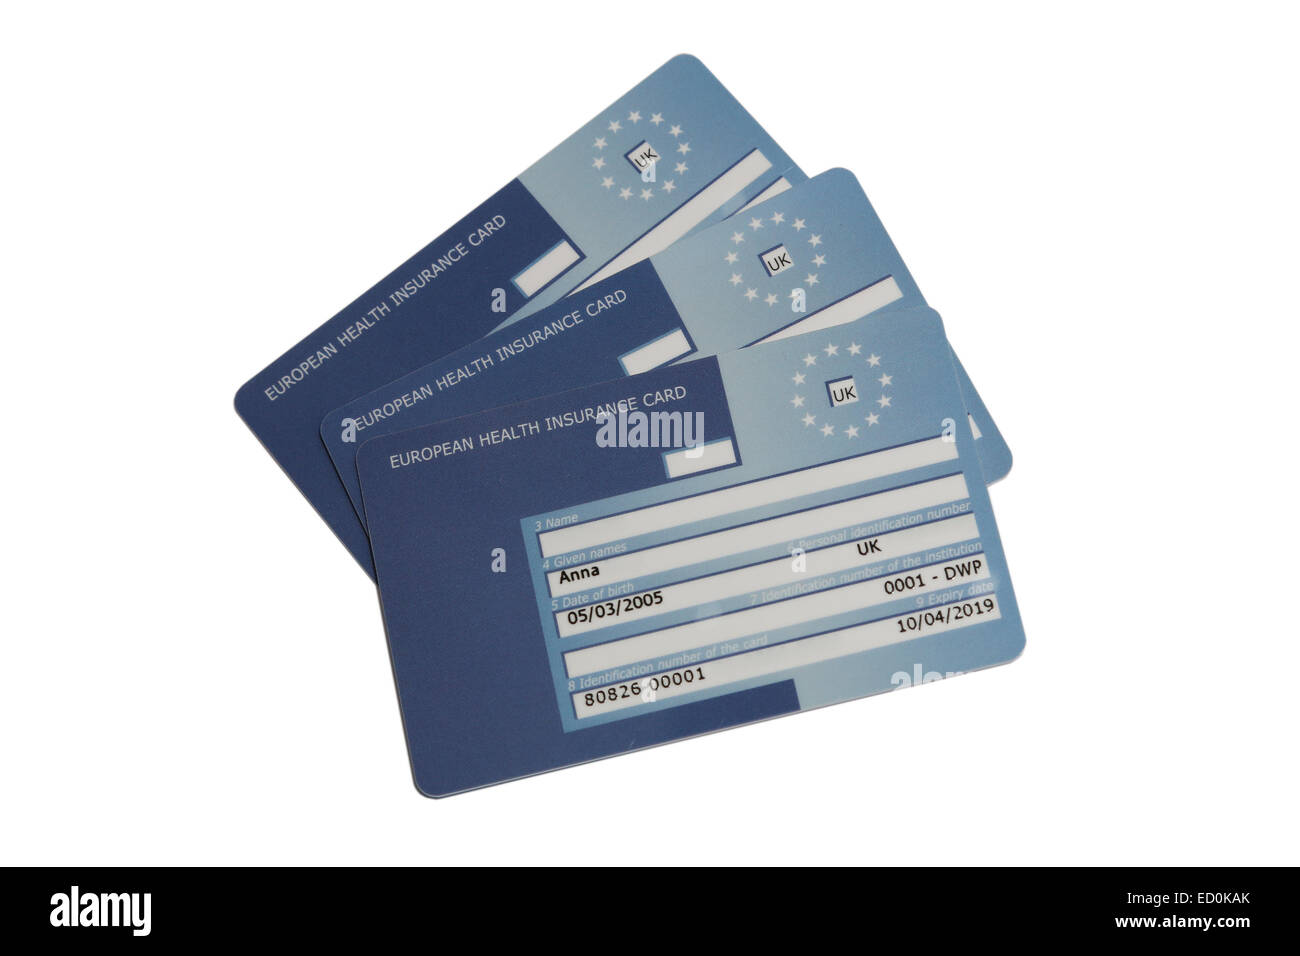 European health insurance cards - e111 replacements - isolated on white Stock Photo